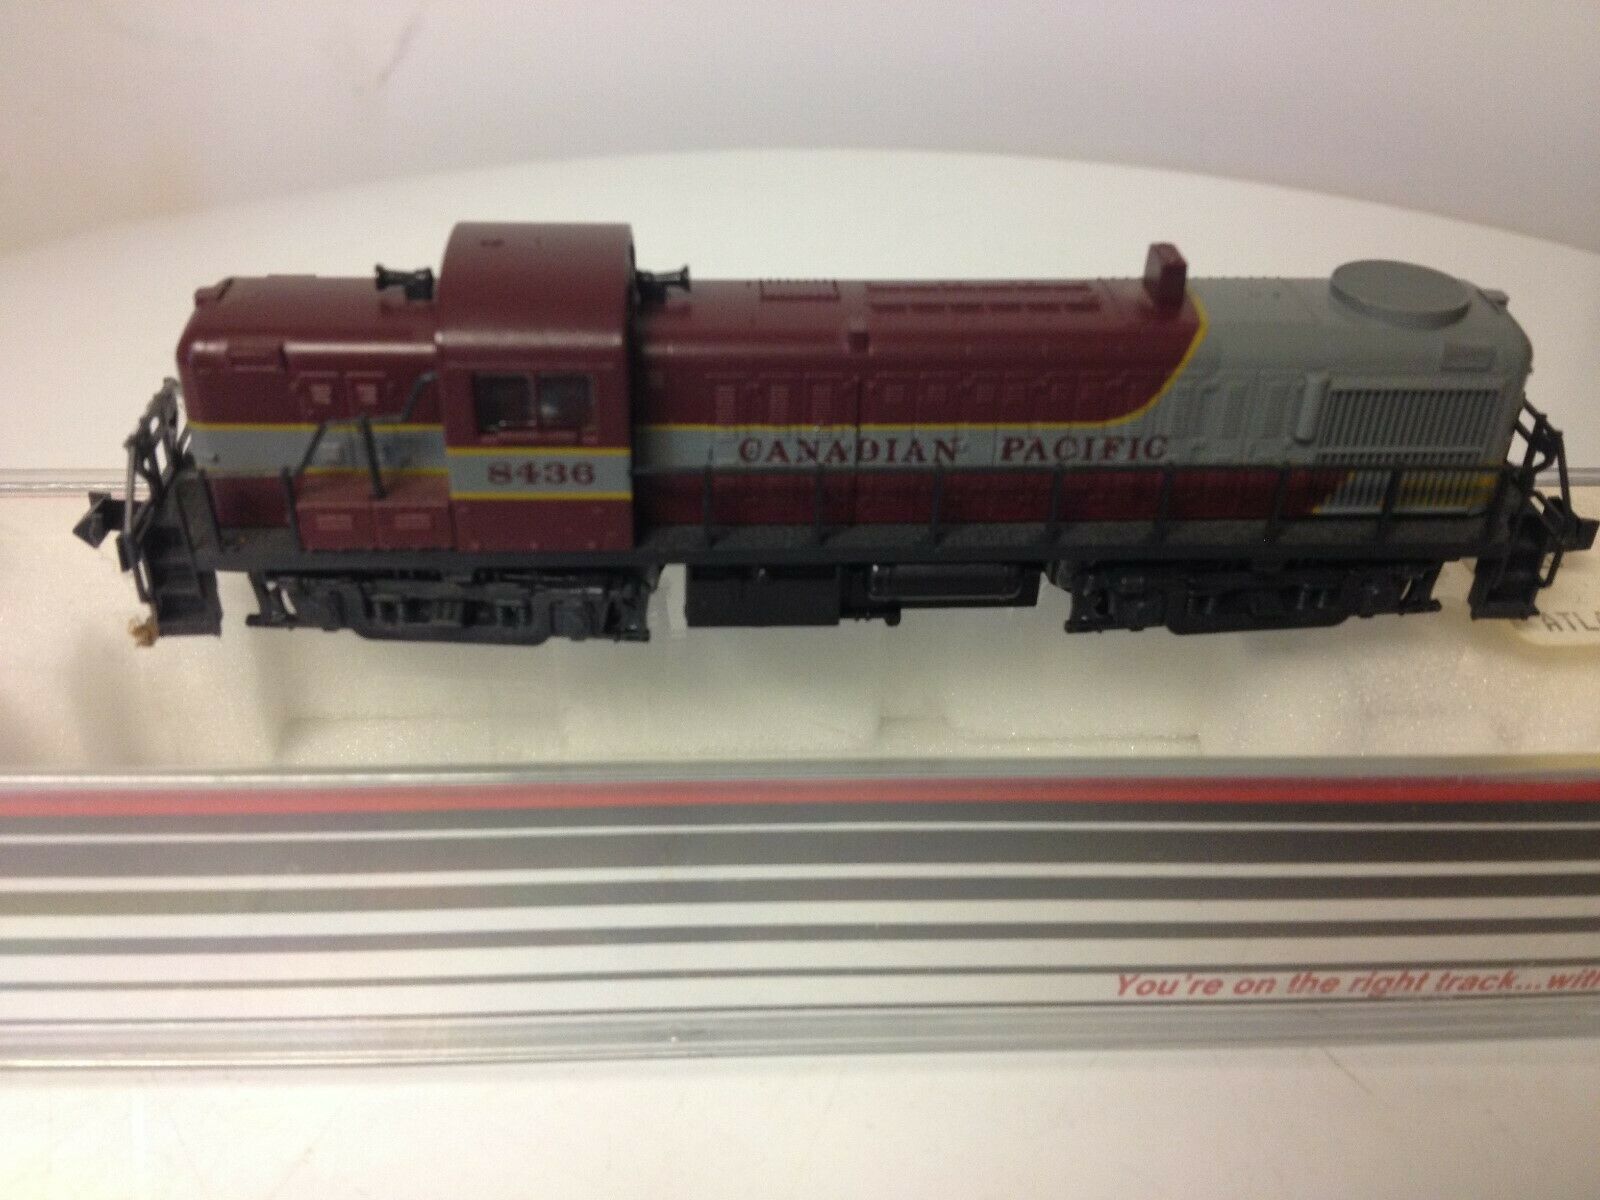 N Scale Canadian Pacific-8436 Engine (Quality Pre Owned)